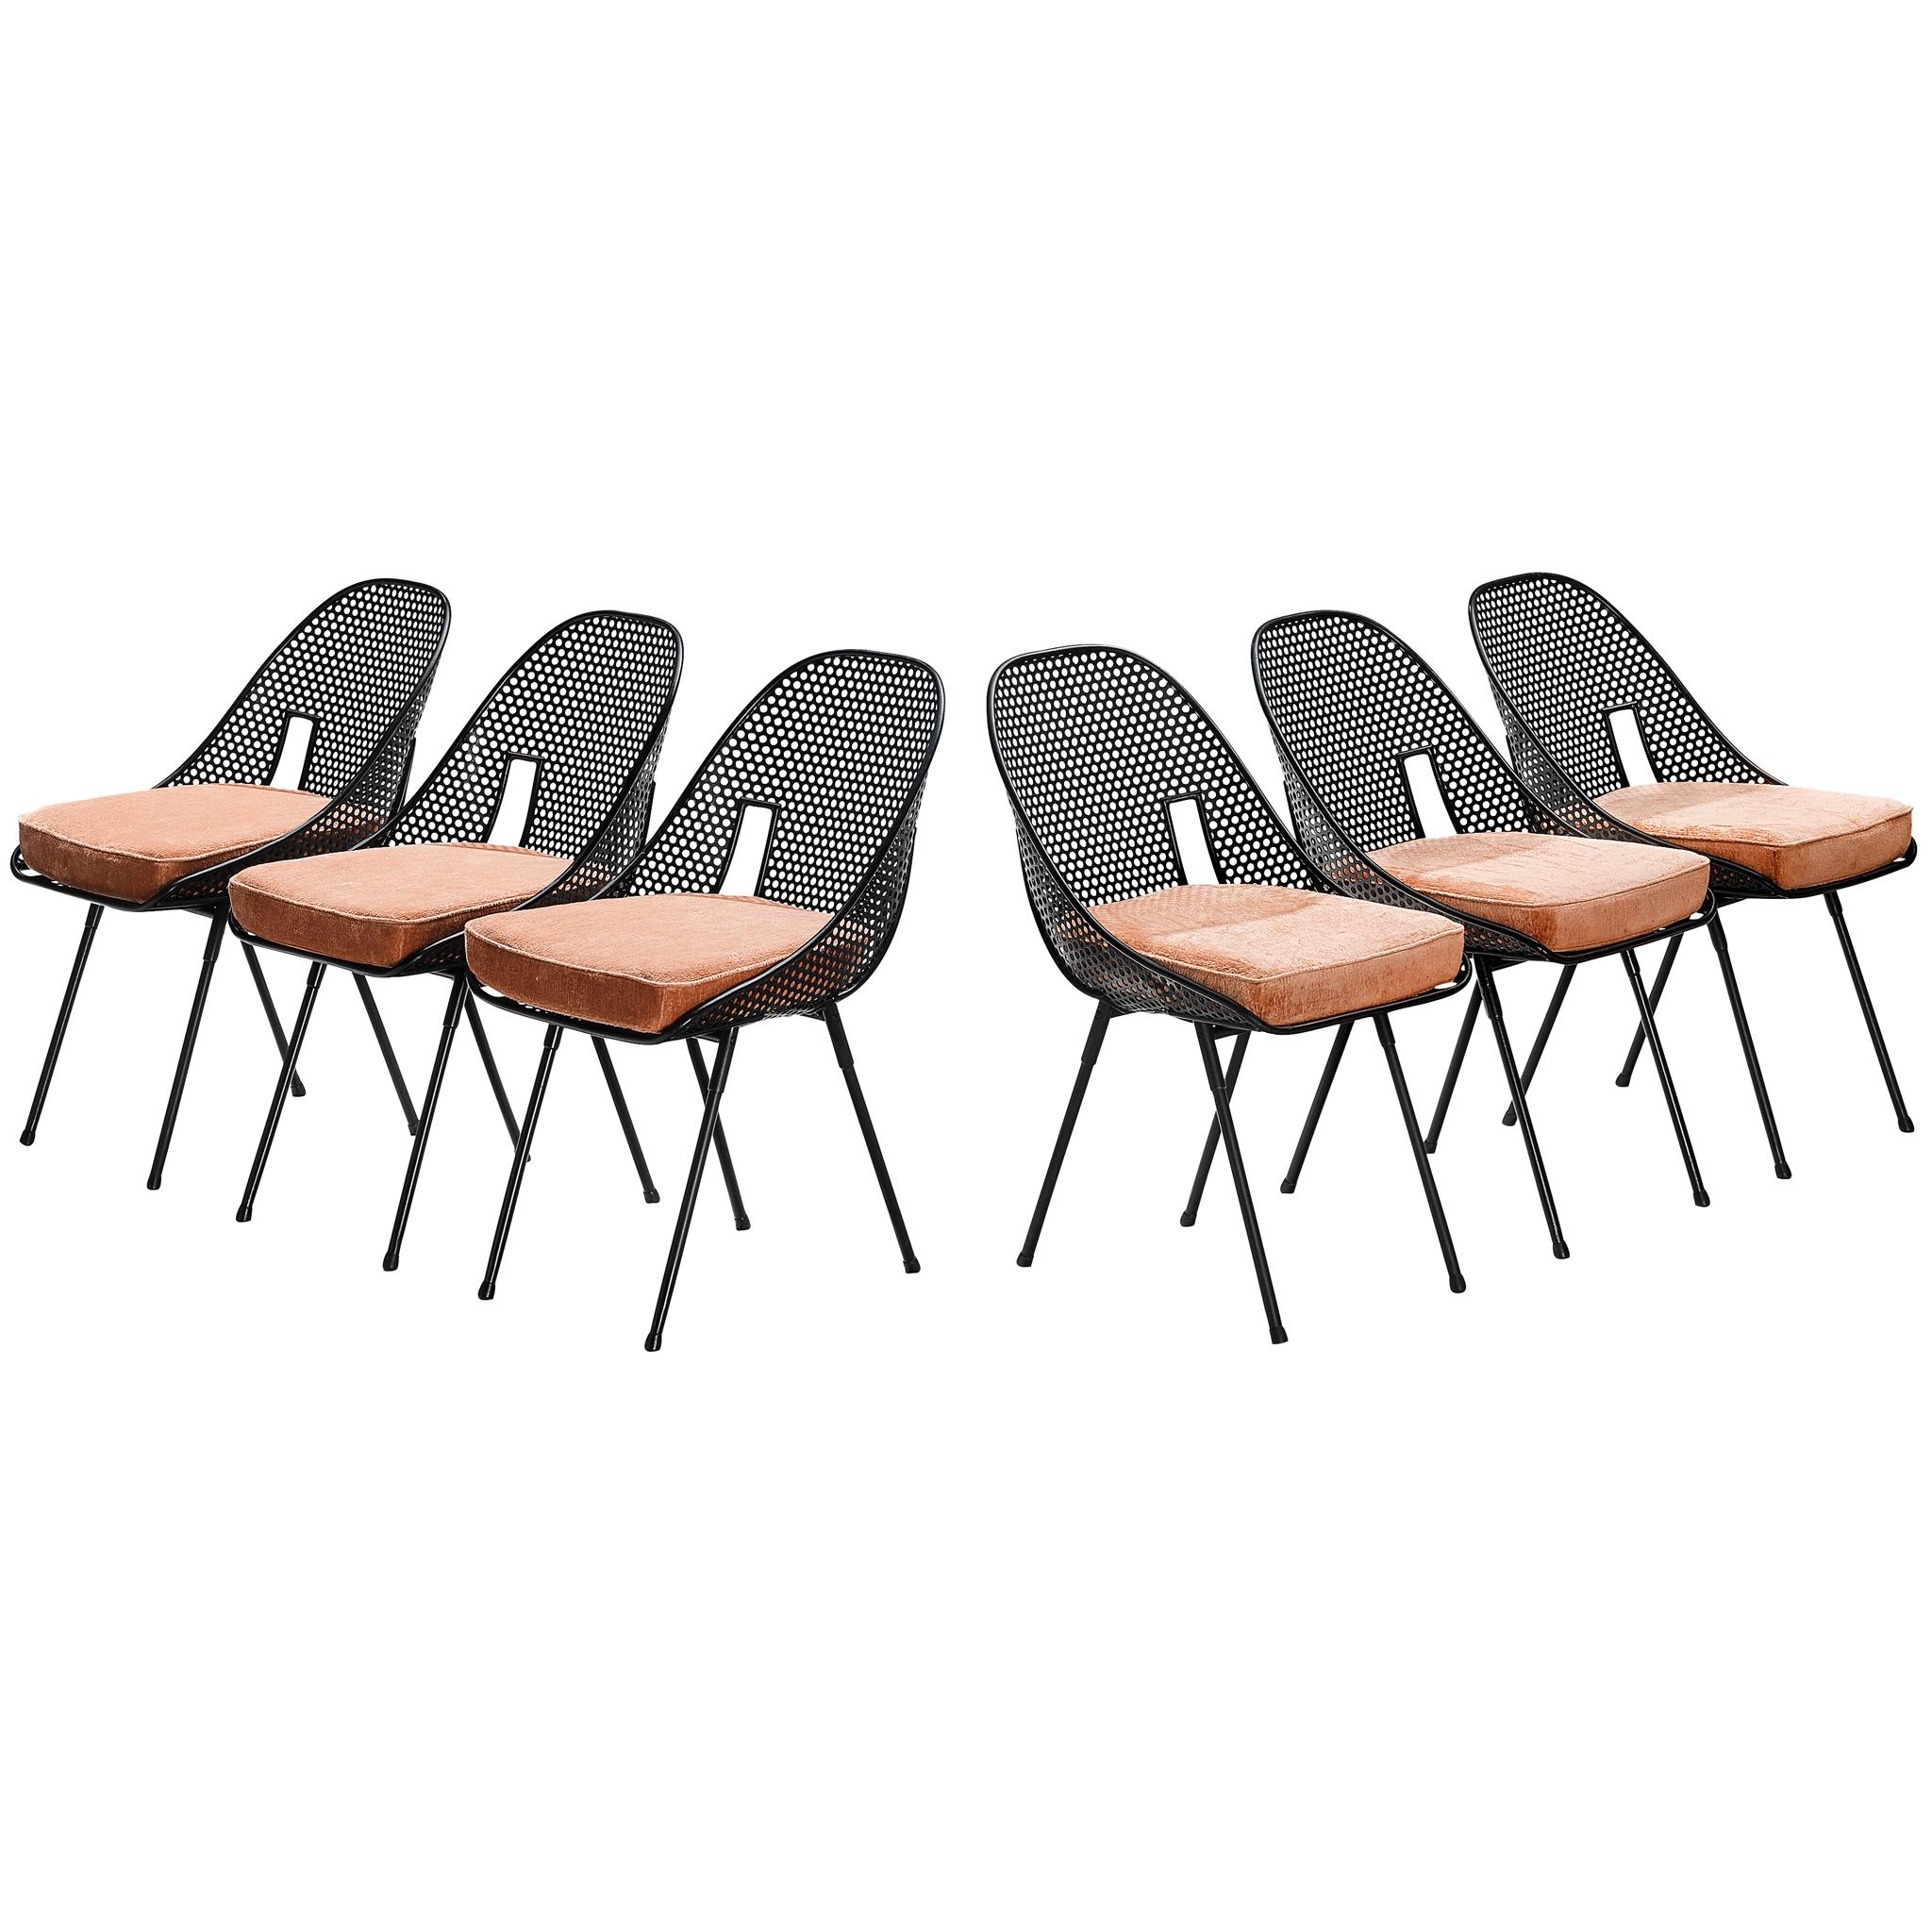 Rare Giuseppe De Vivo Set of Six Chairs in Black Perforated Metal  For Sale